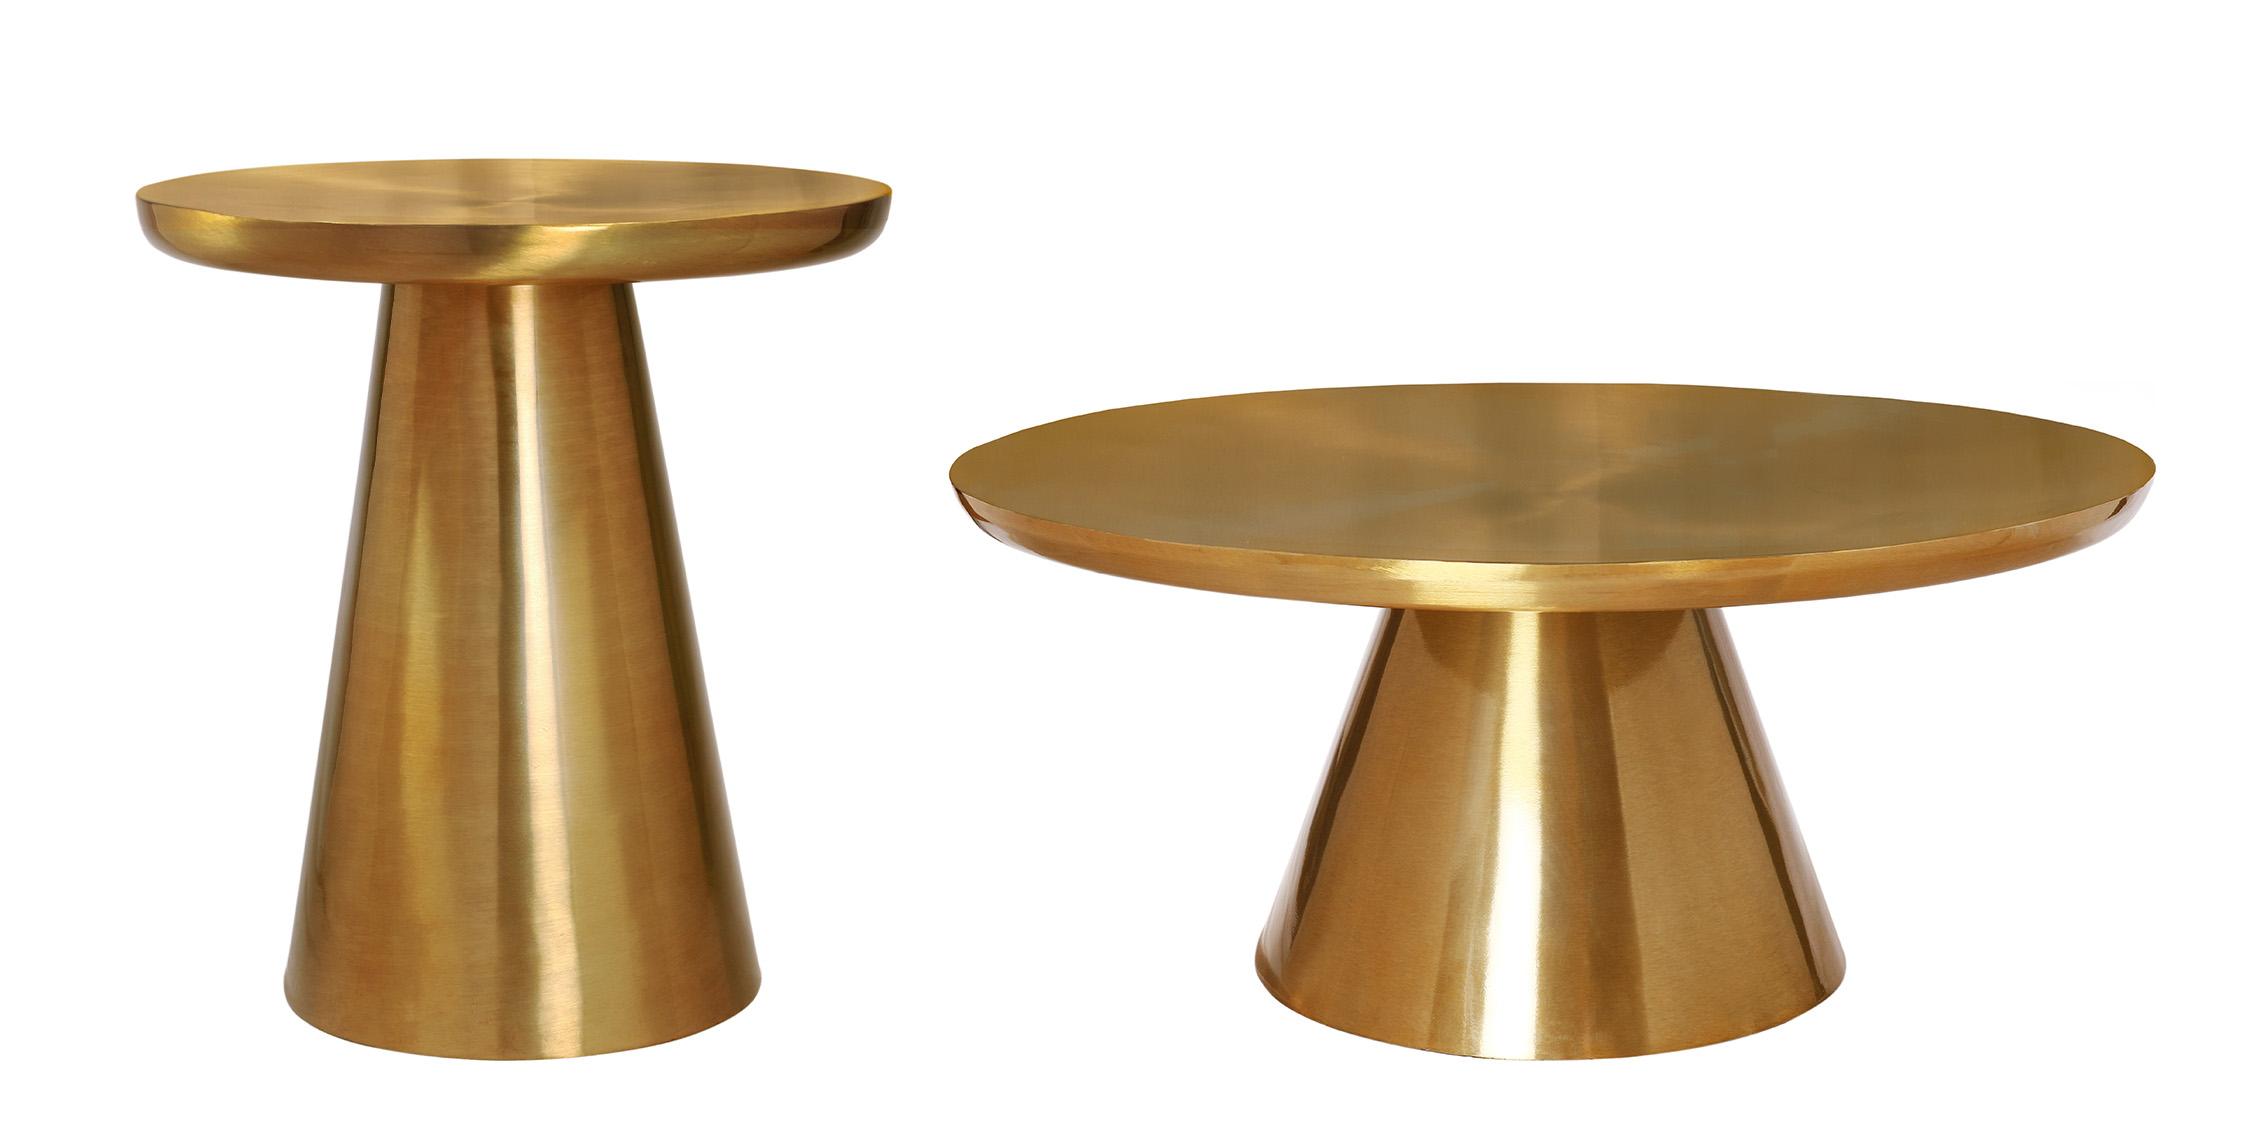 Contemporary, Modern Coffee Table Set MARTINI 239-C 239-C-Set-2 in Gold Finish Metal